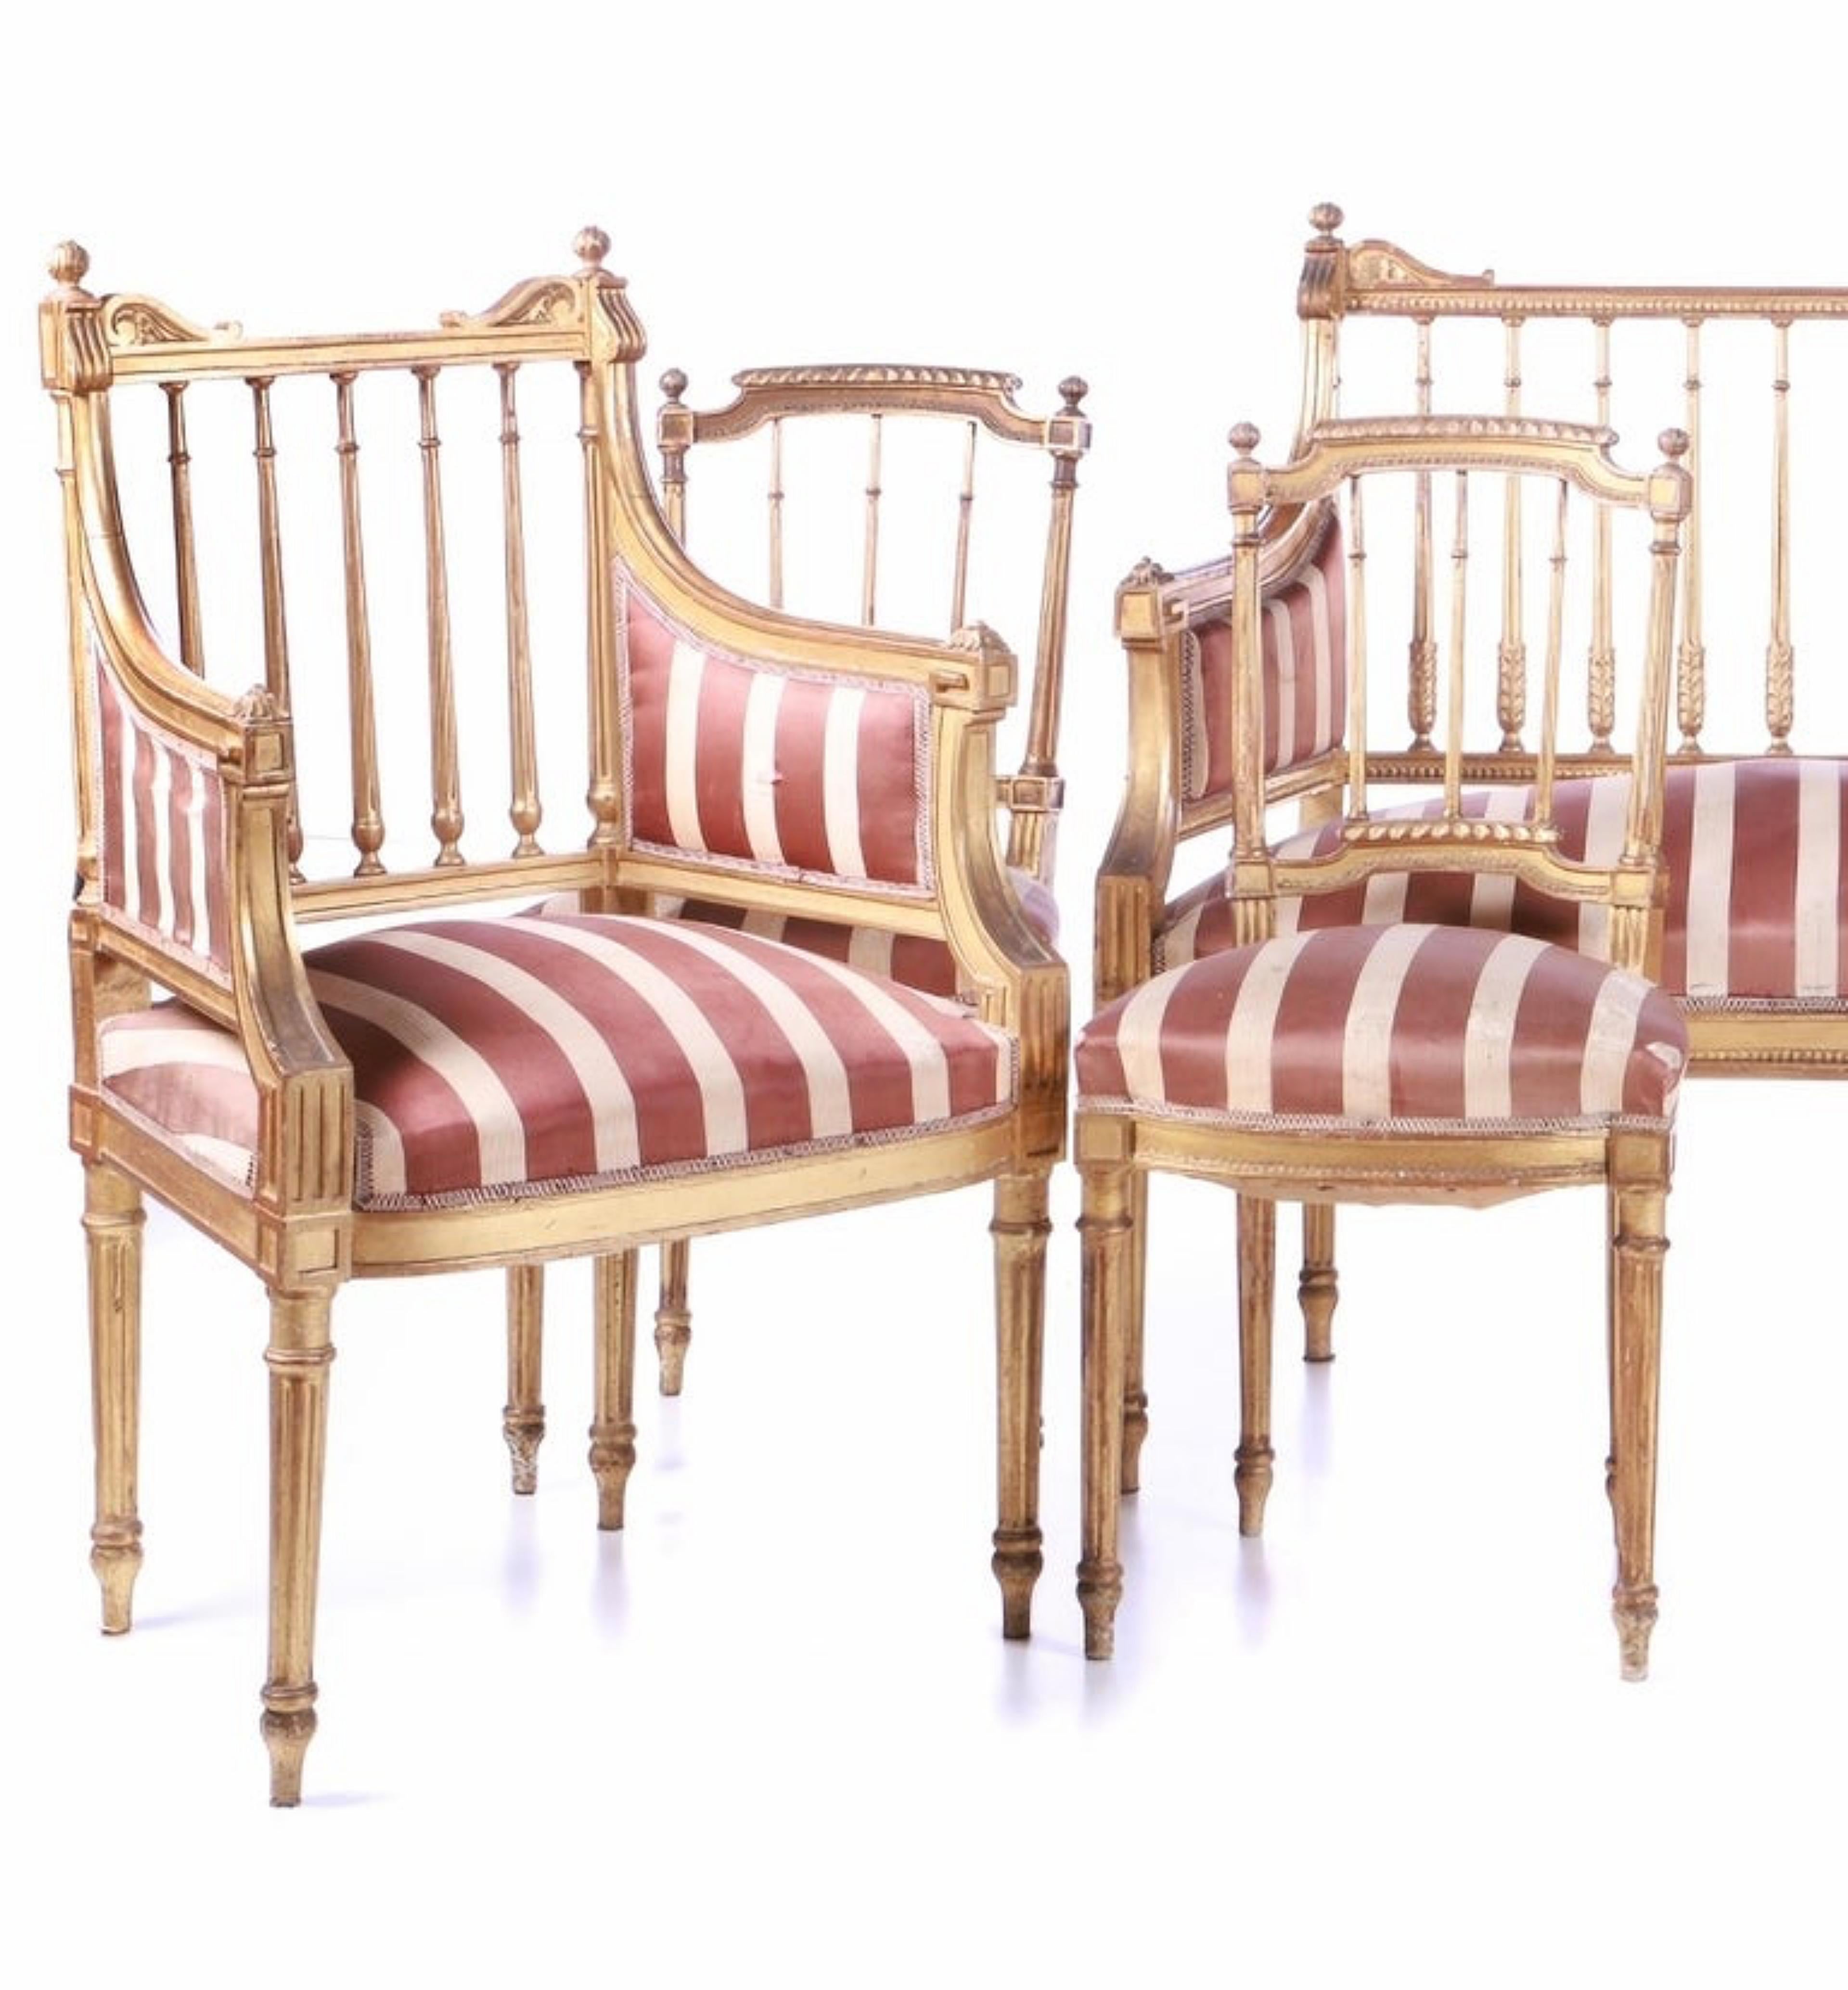 Baroque French Canape Set, 4 Chairs and 2 Armchairs Late 19th Century Early 20th Century For Sale